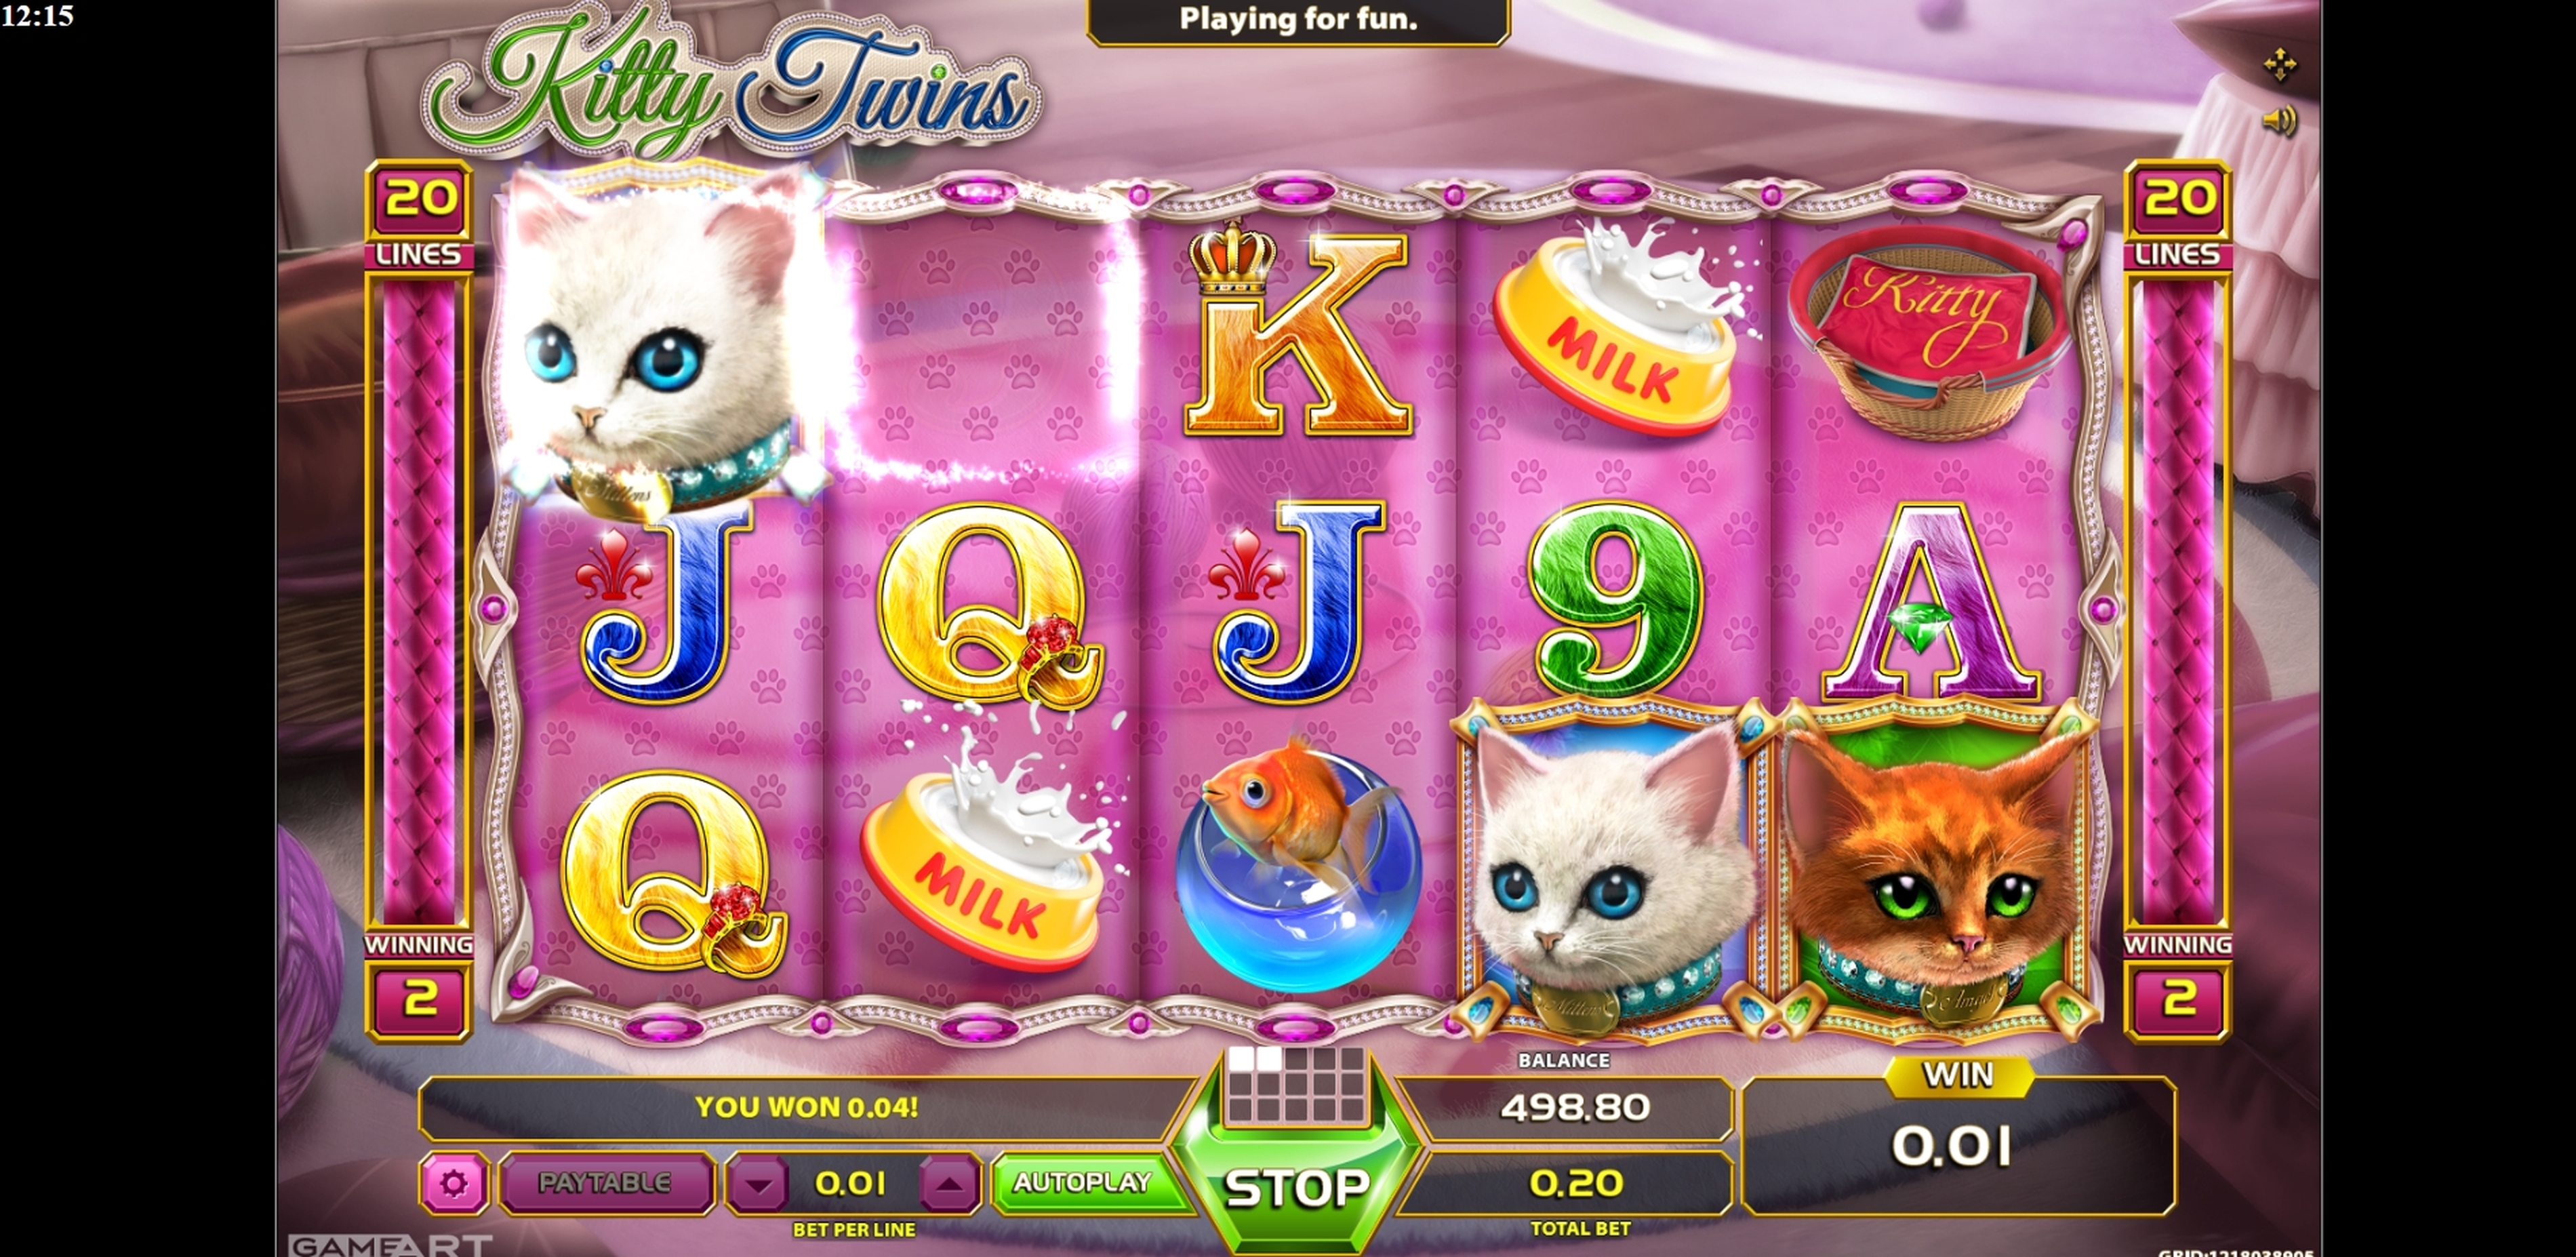 Win Money in Kitty Twins Free Slot Game by GameArt